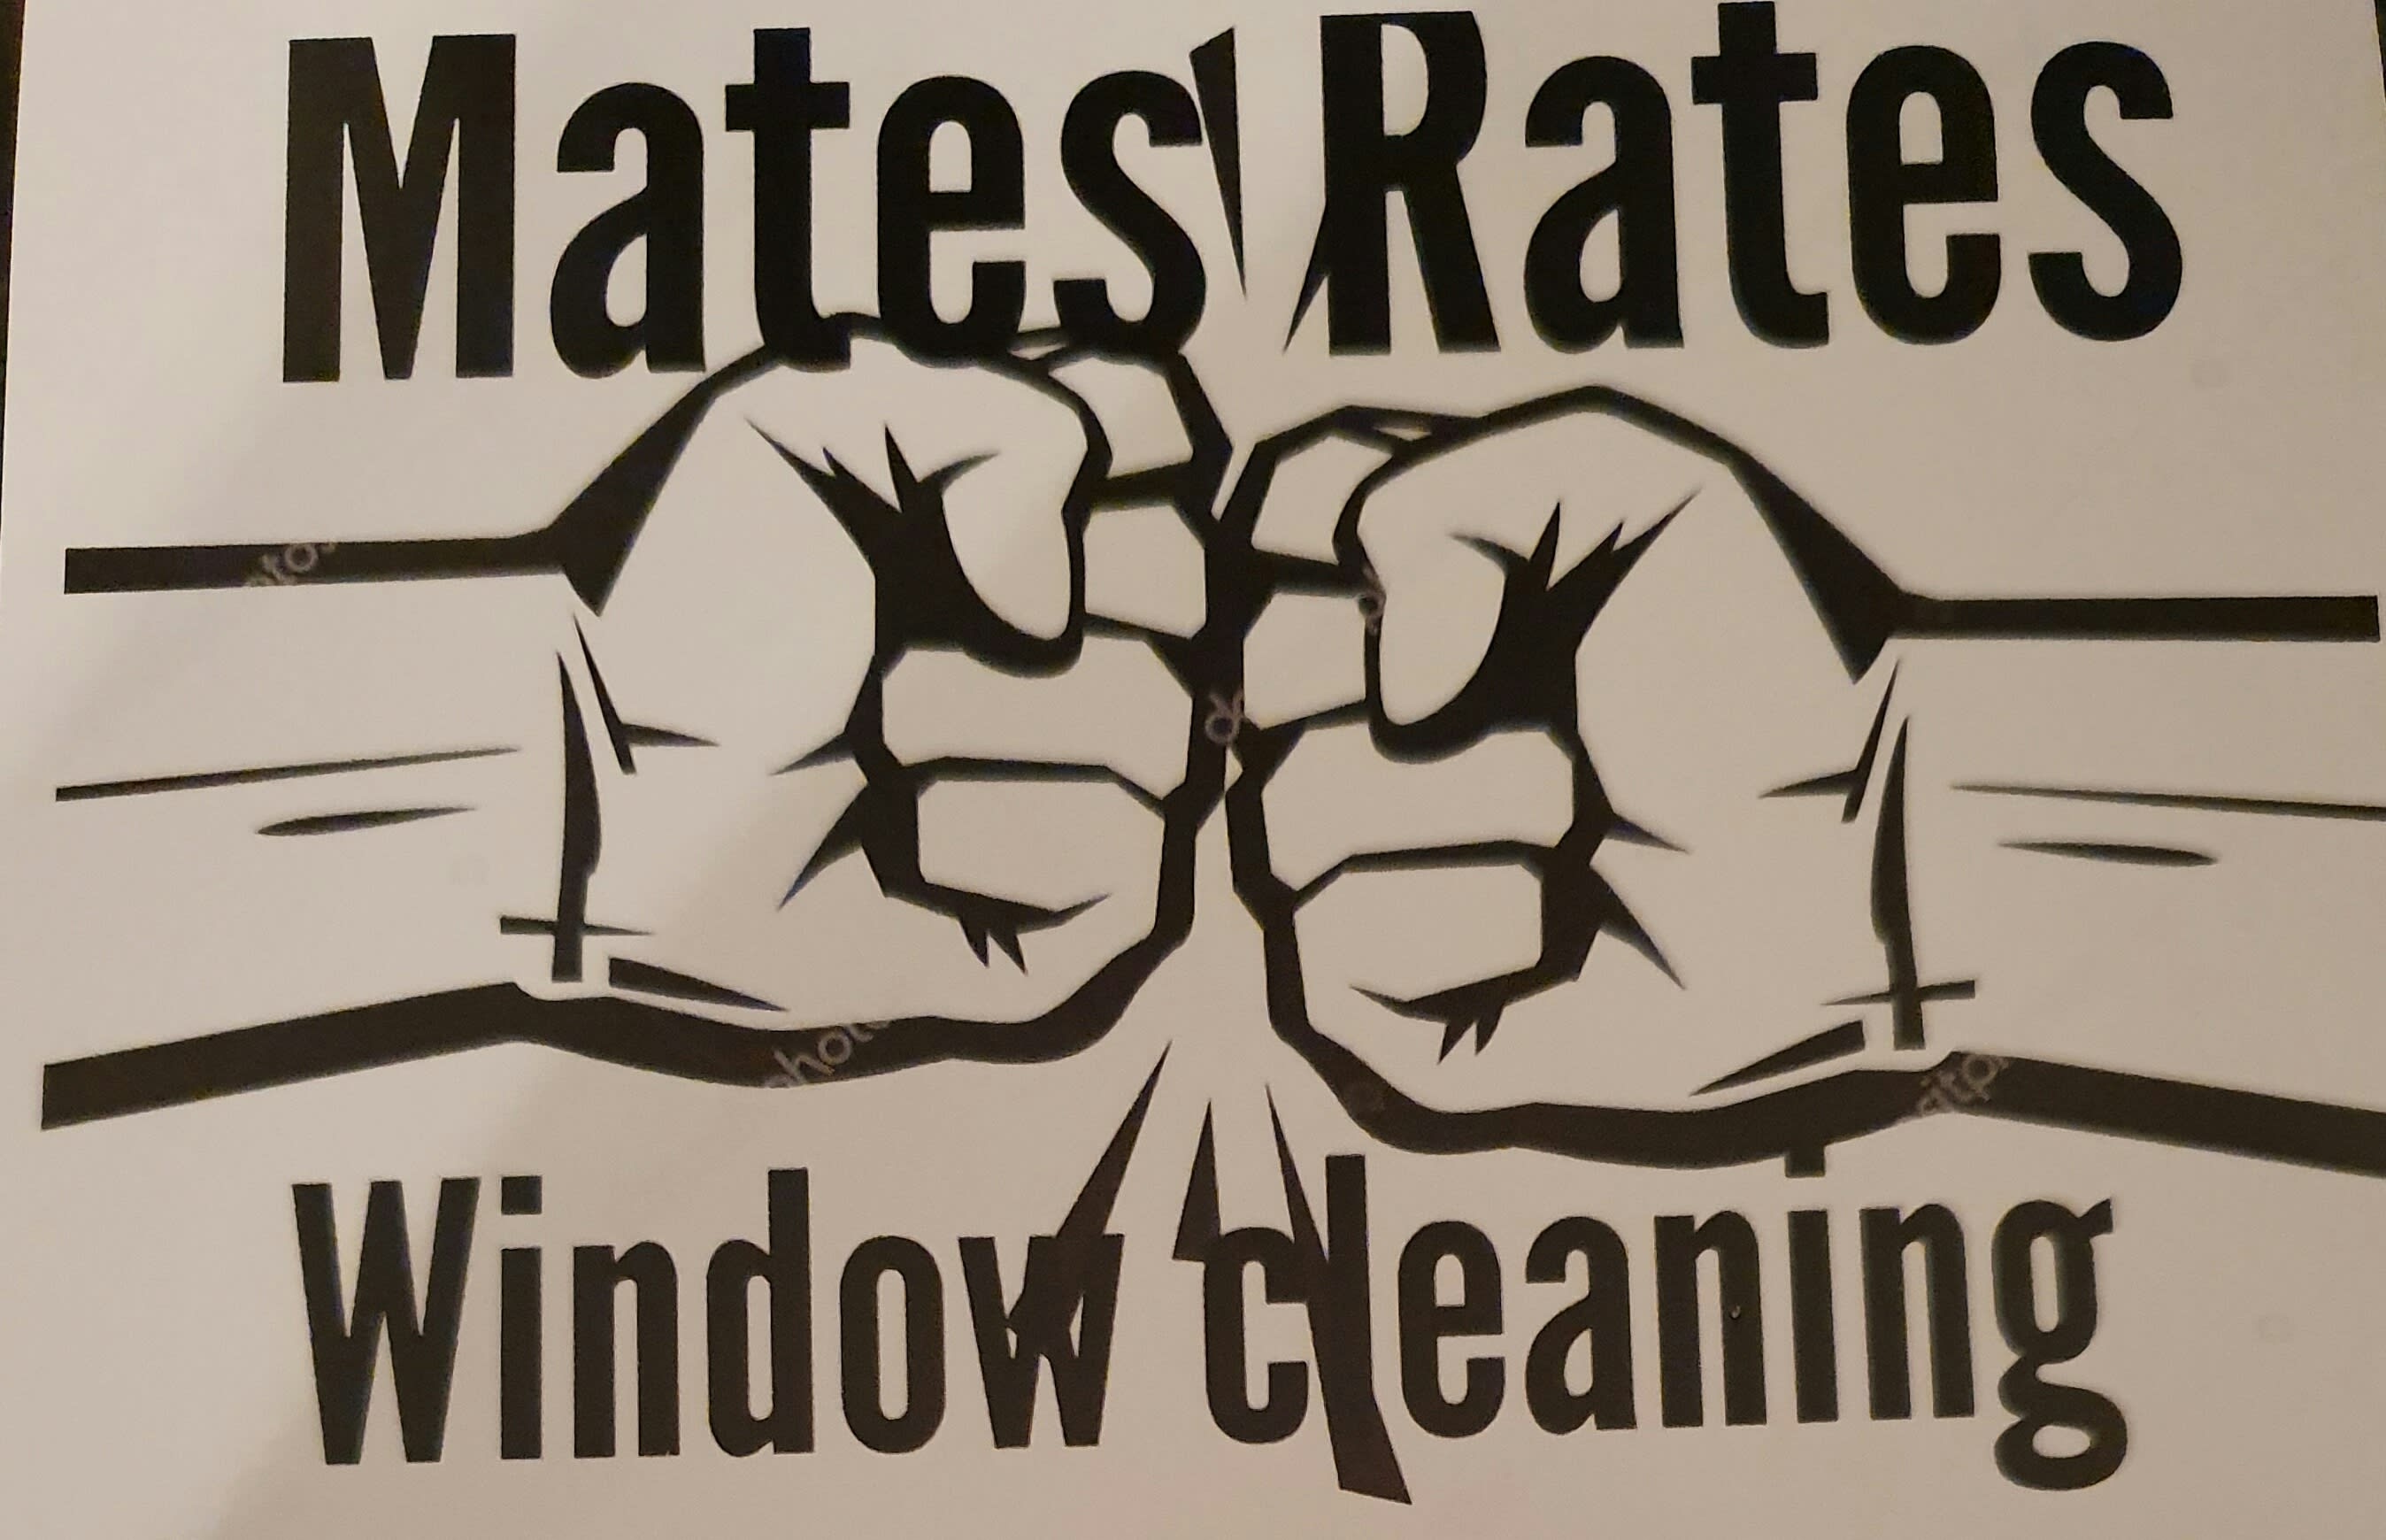 Mates Rates Window Cleaning